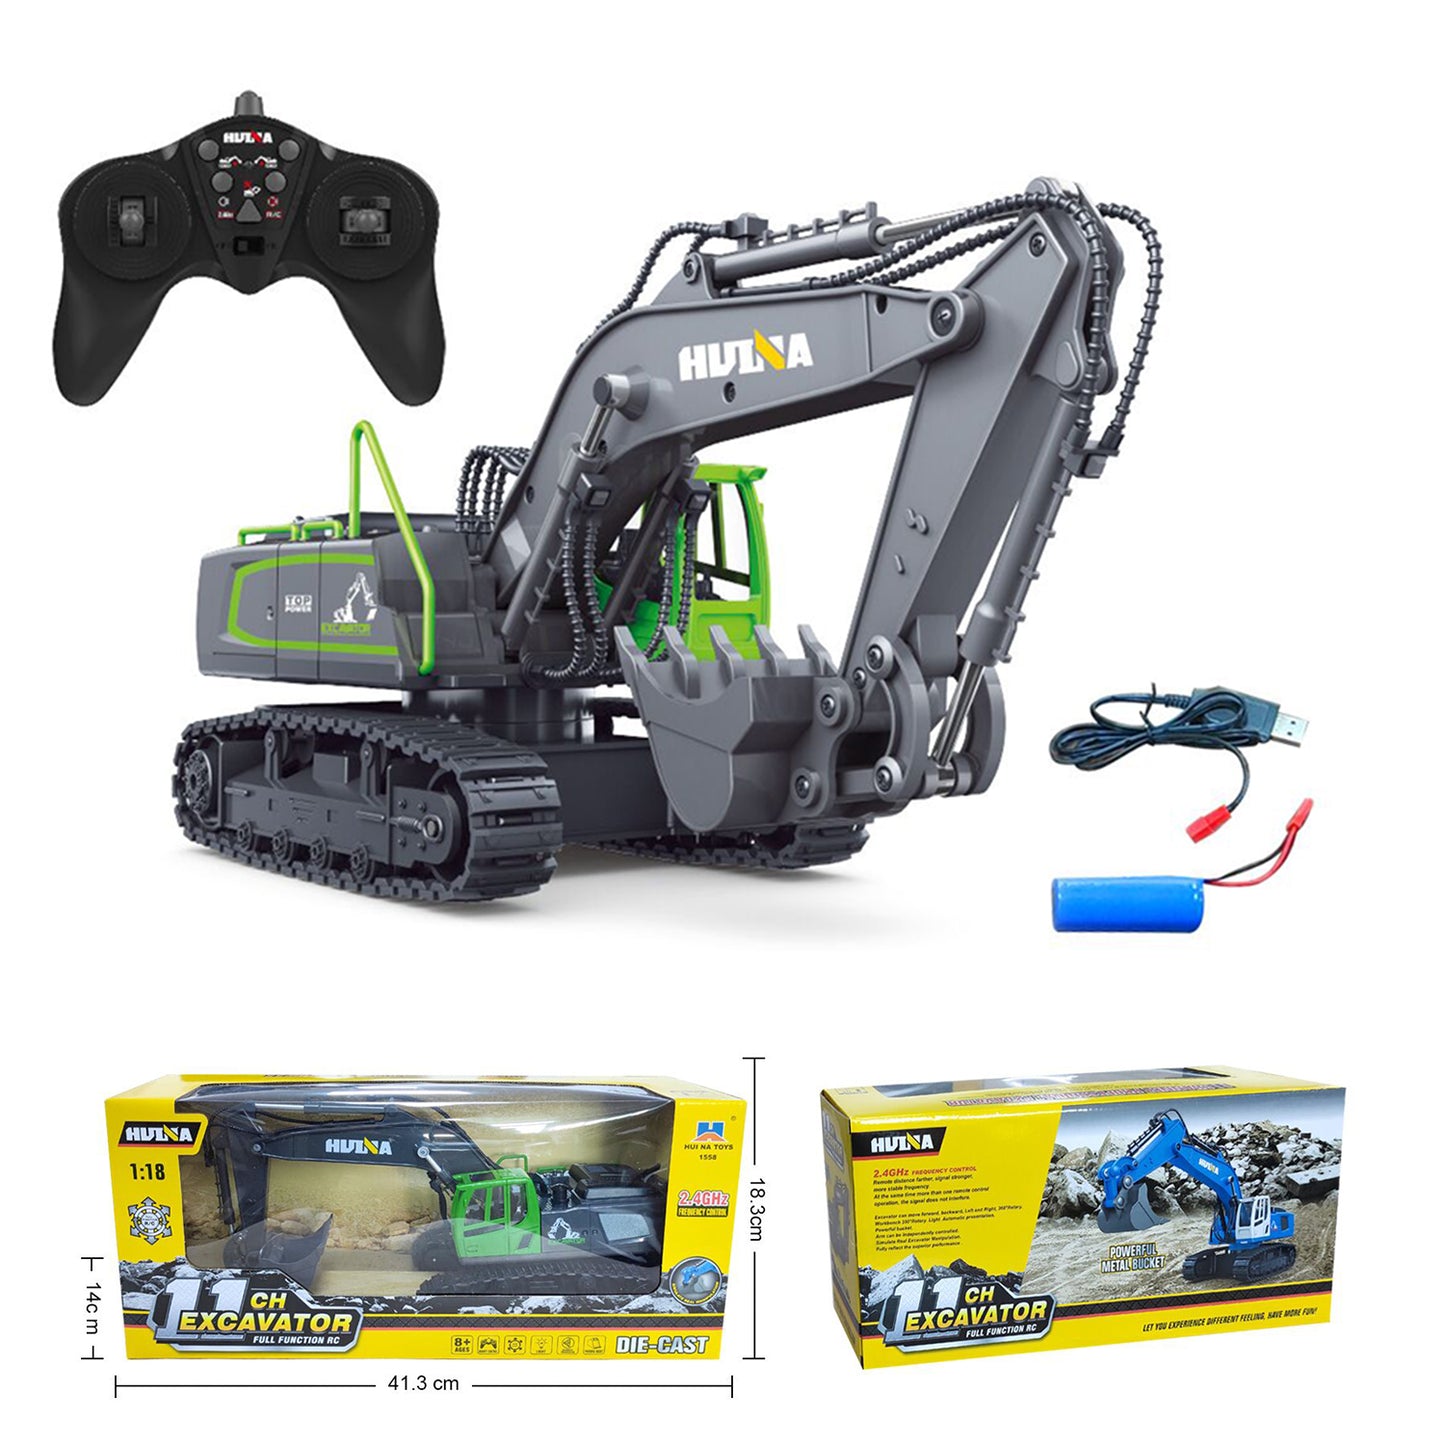 HUINA 1/18 RC Excavator 1558 Ready To Run Model Toy Car Digger Remote Control Battery 360Degrees Rotary Light 400MAH Battery Tracks